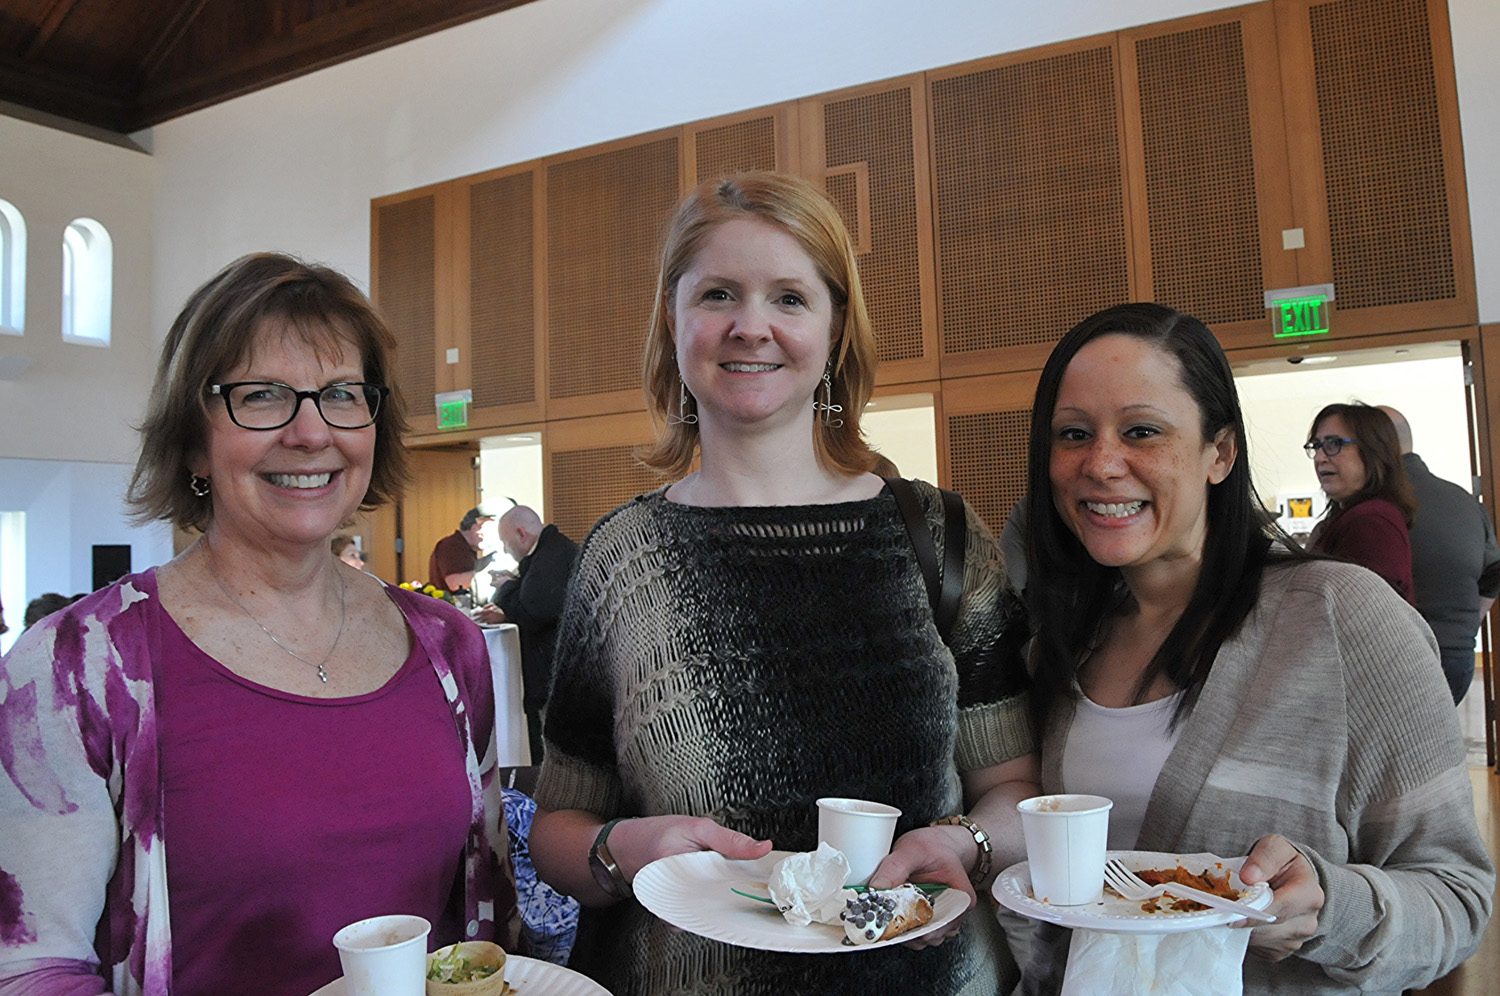 Maureen Zimmer, academic affairs coordinator, Megan Flagg, executive assistant to the provost and vice president for academic affairs, and Lisa Sacks, assistant director for curricular initiatives.